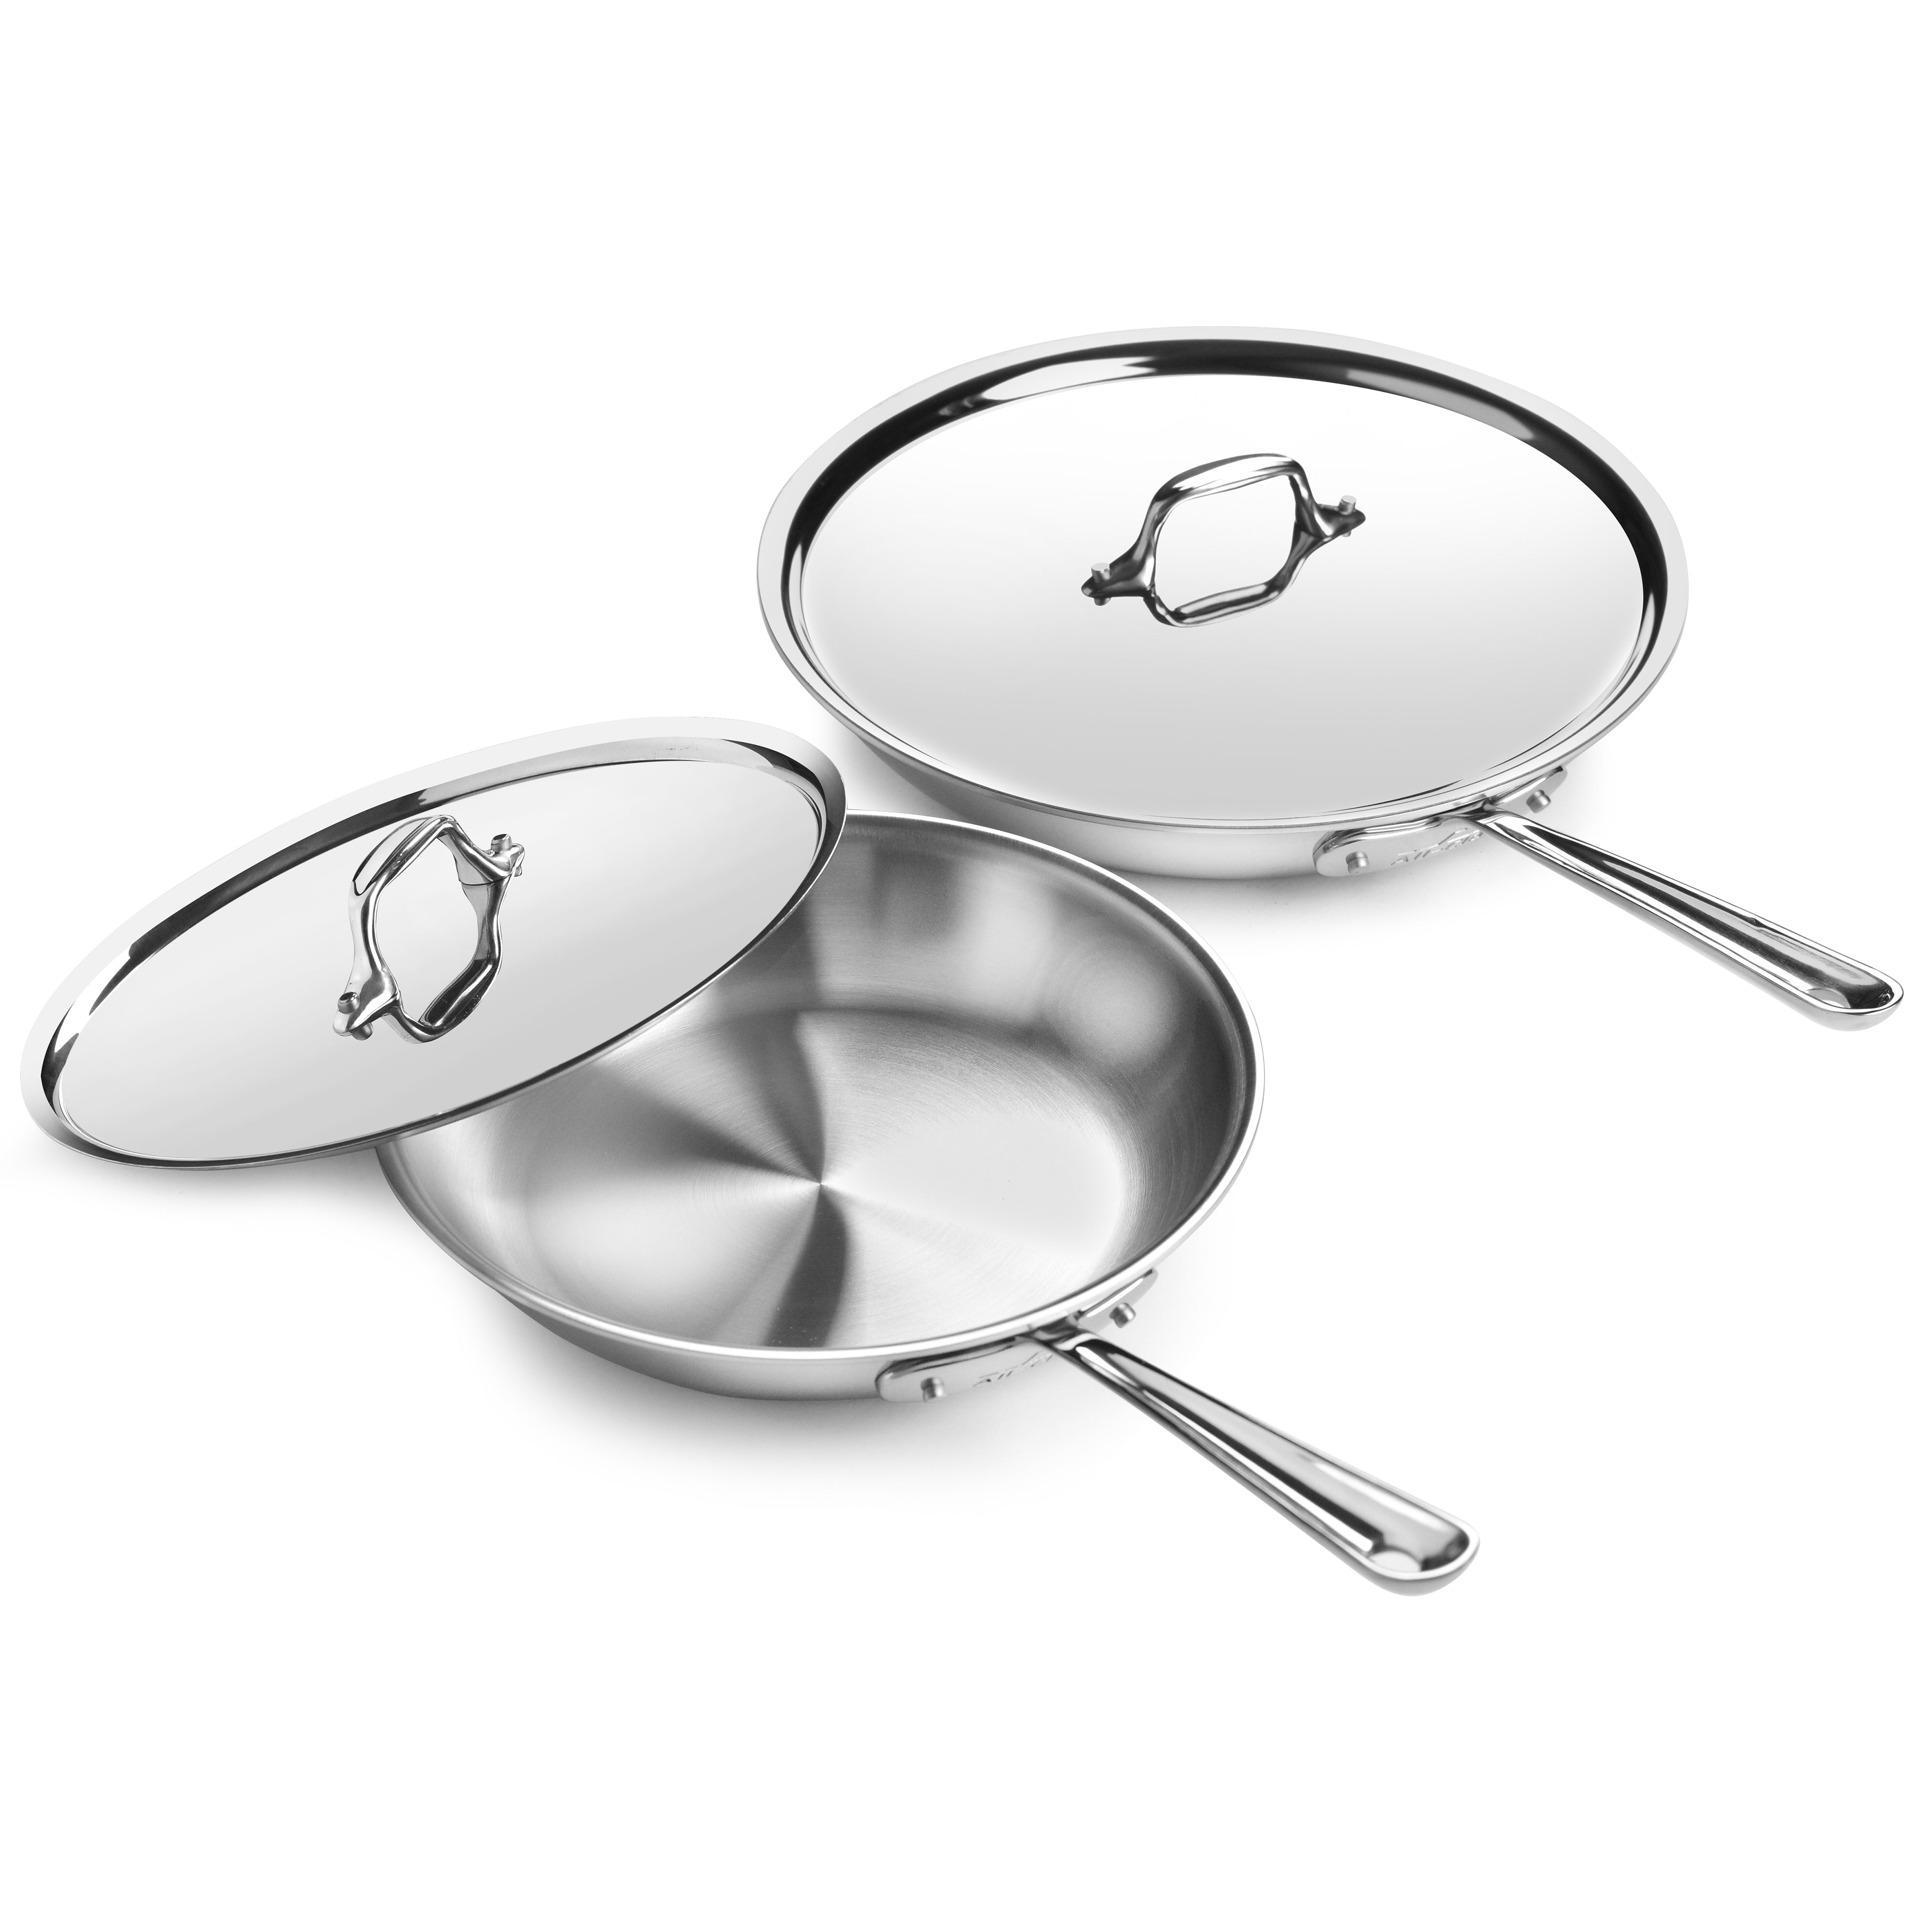 All-Clad D3 Stainless 3-ply Bonded Cookware, Fry Pan with lid, 10